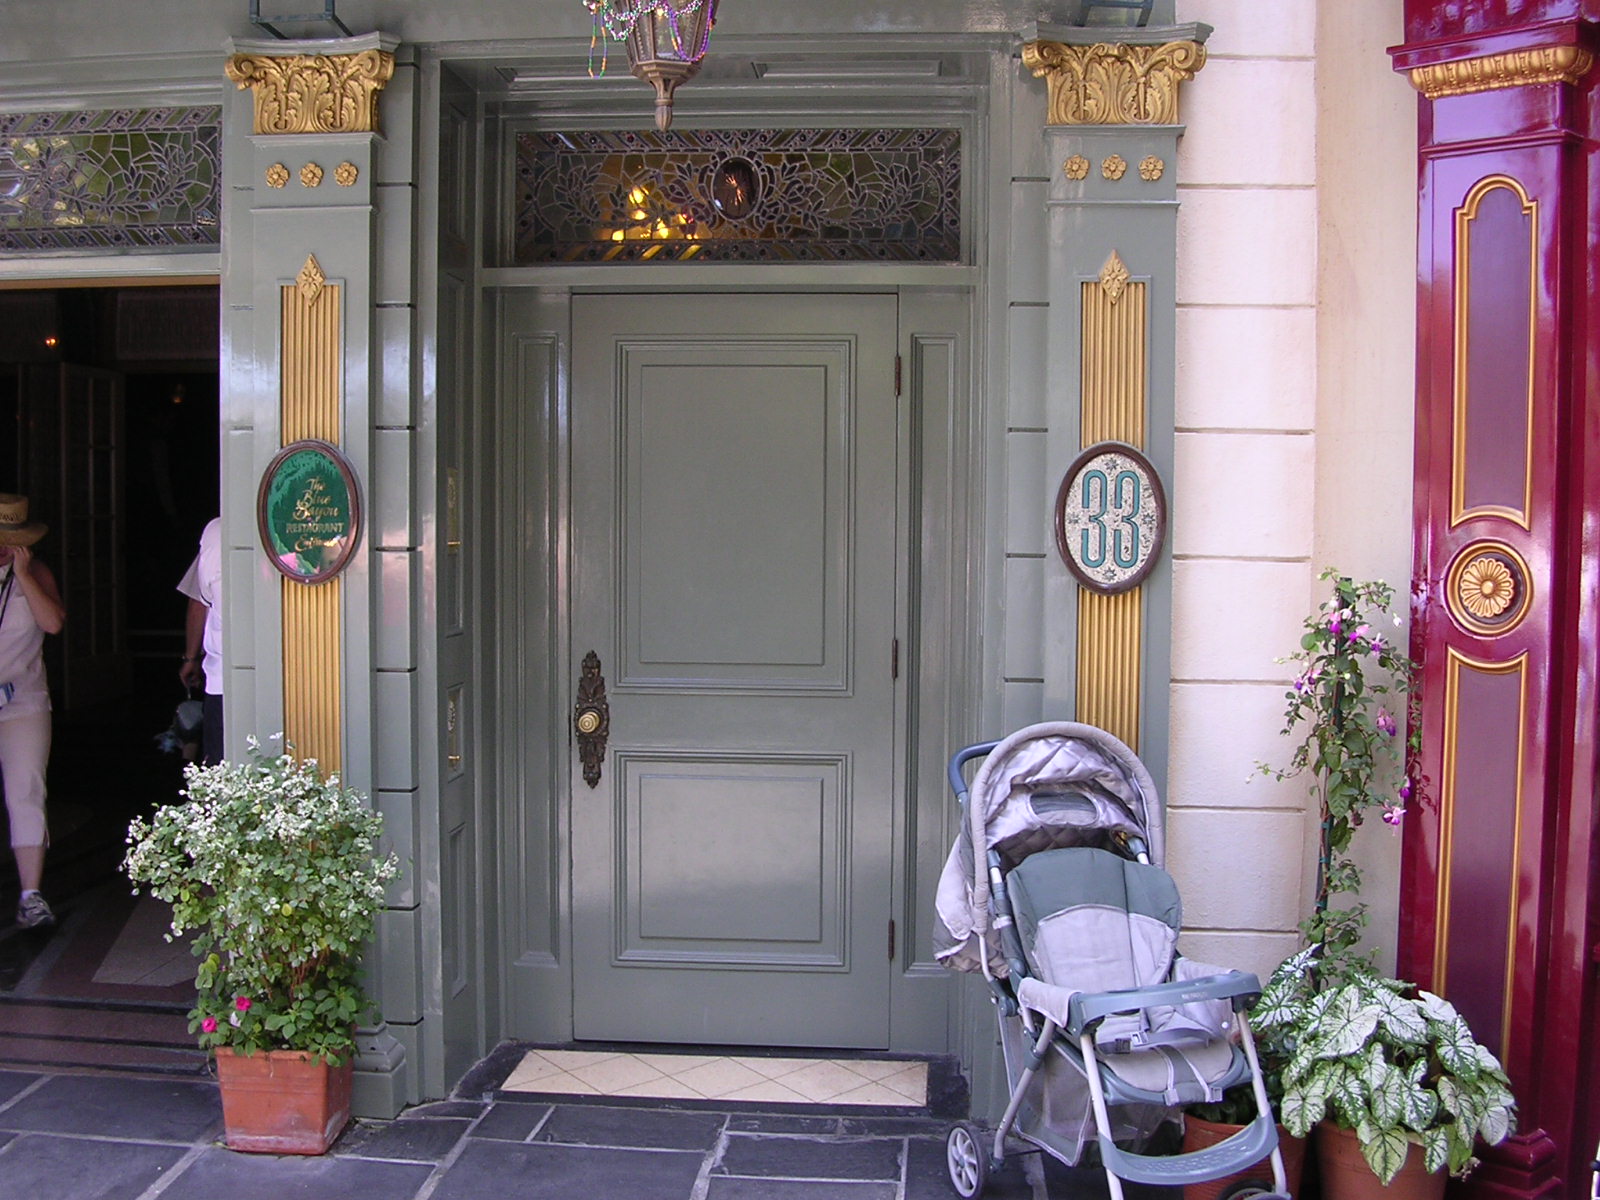 Places You Can't Visit - Club 33 Disneyland